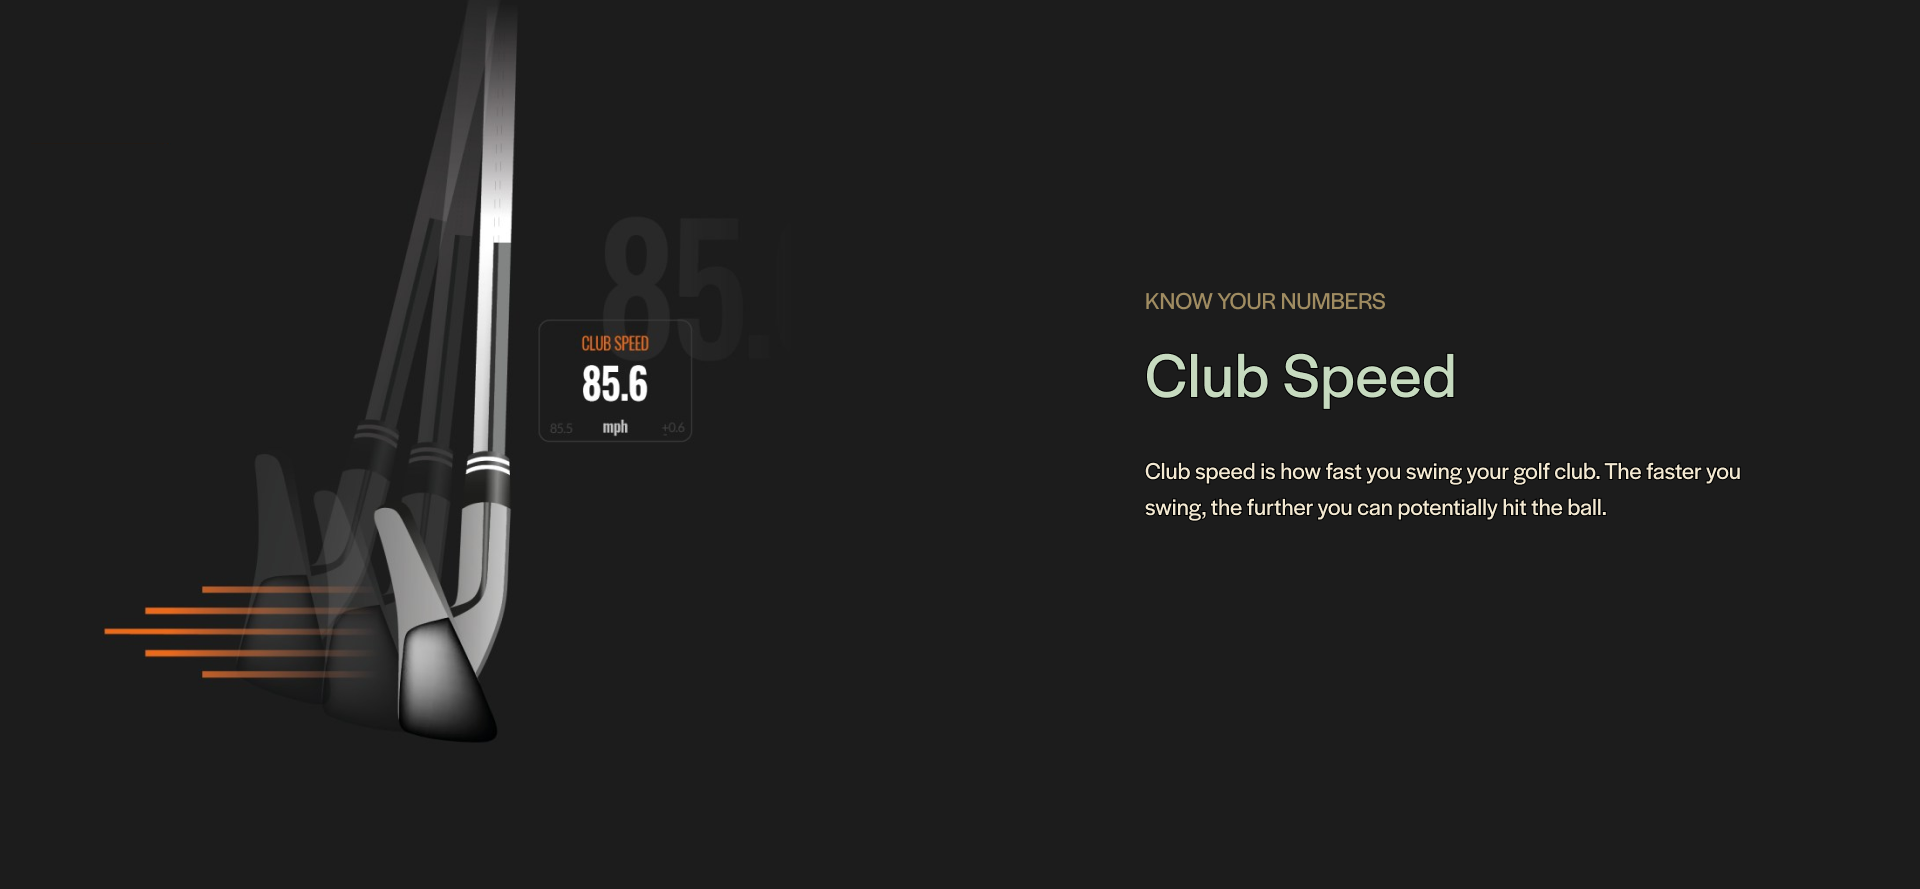 Club speed is how fast you swing your golf club. The faster you swing, the further you can potentially hit the ball.